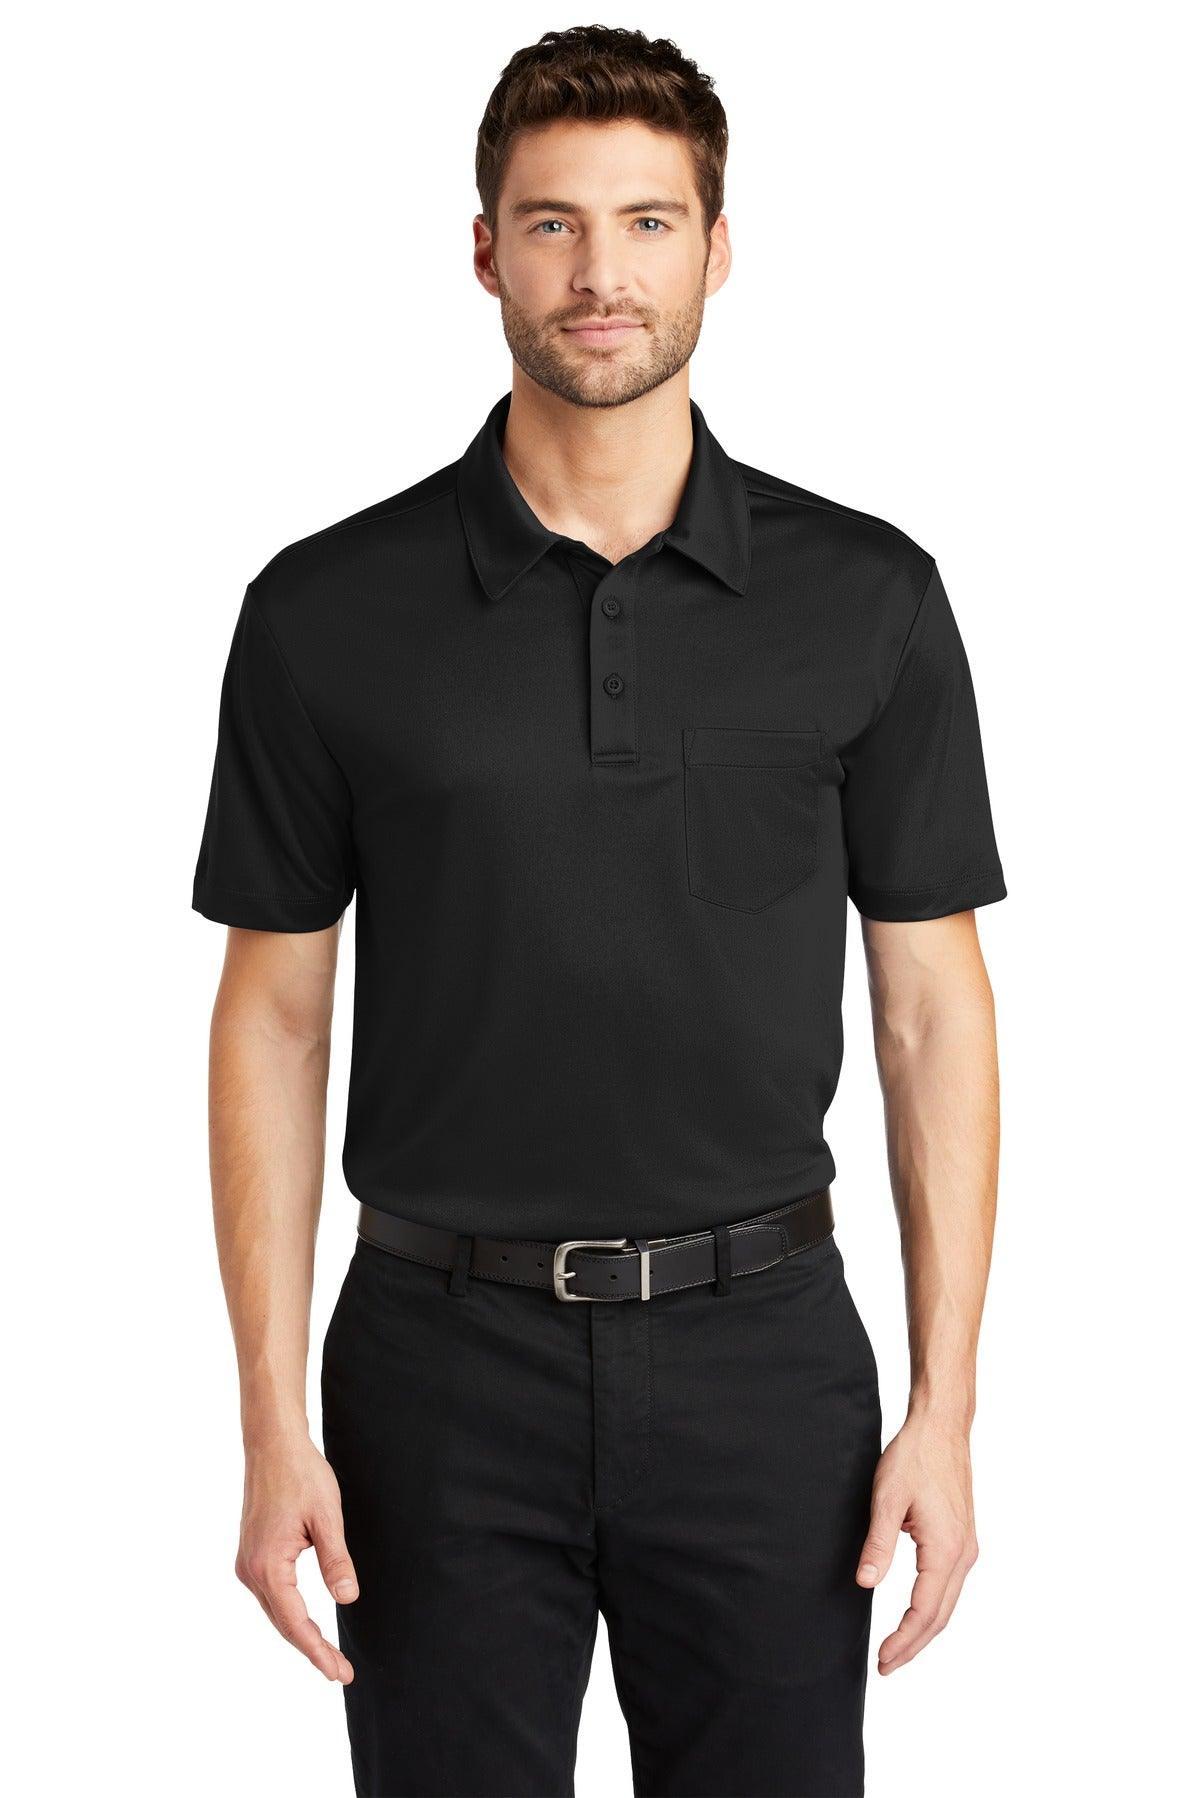 Port Authority Silk Touch Performance Pocket Polo. K540P - Dresses Max